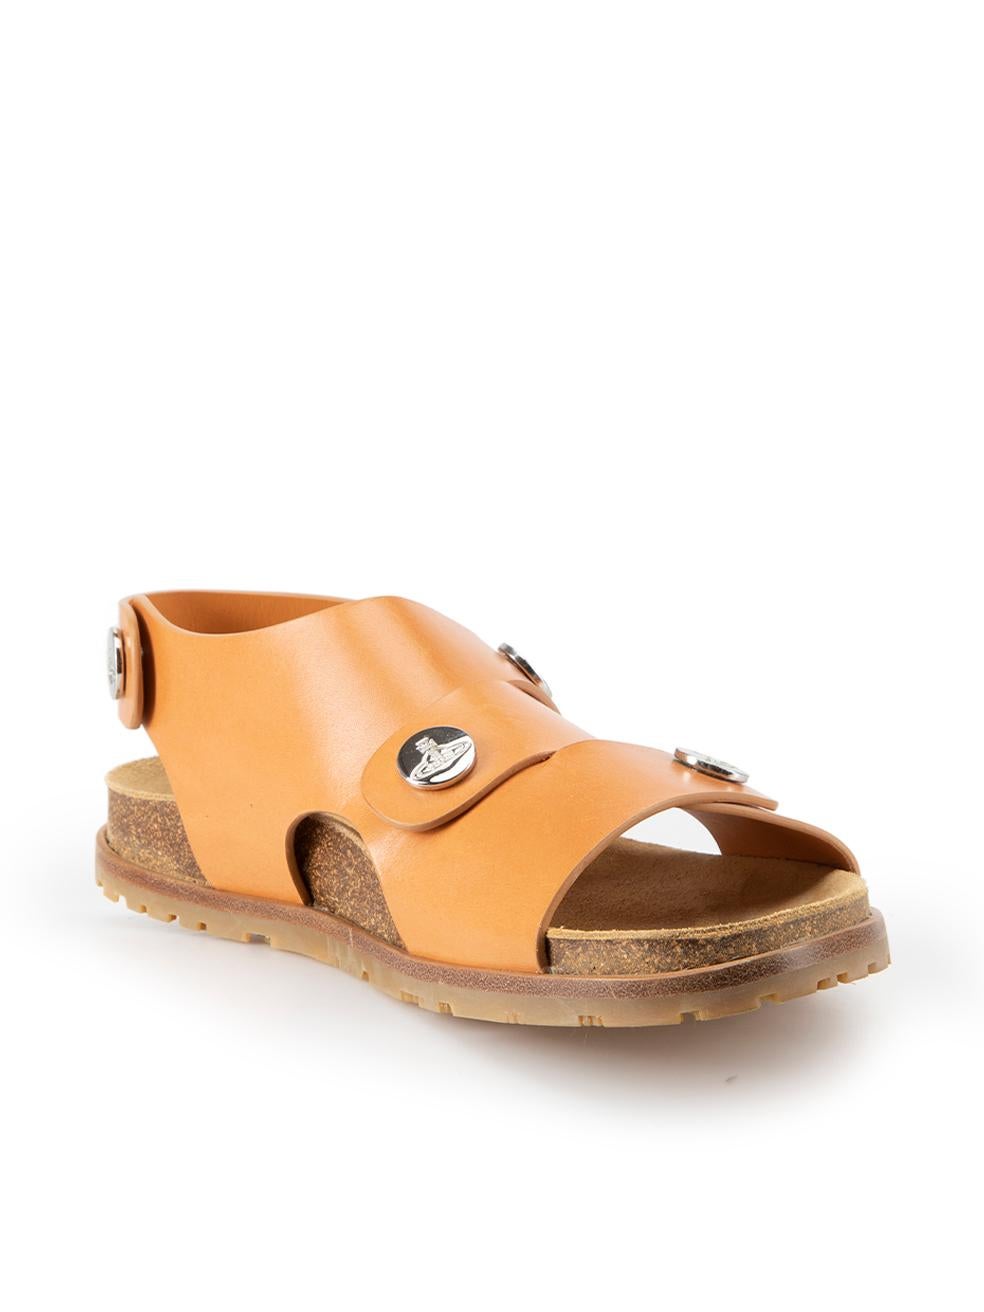 CONDITION is Very good. Minimal wear to sandals is evident. Minimal wear to exterior leather where scratches is visible on both shoes on this used Vivienne Westwood designer resale item. This item comes with original